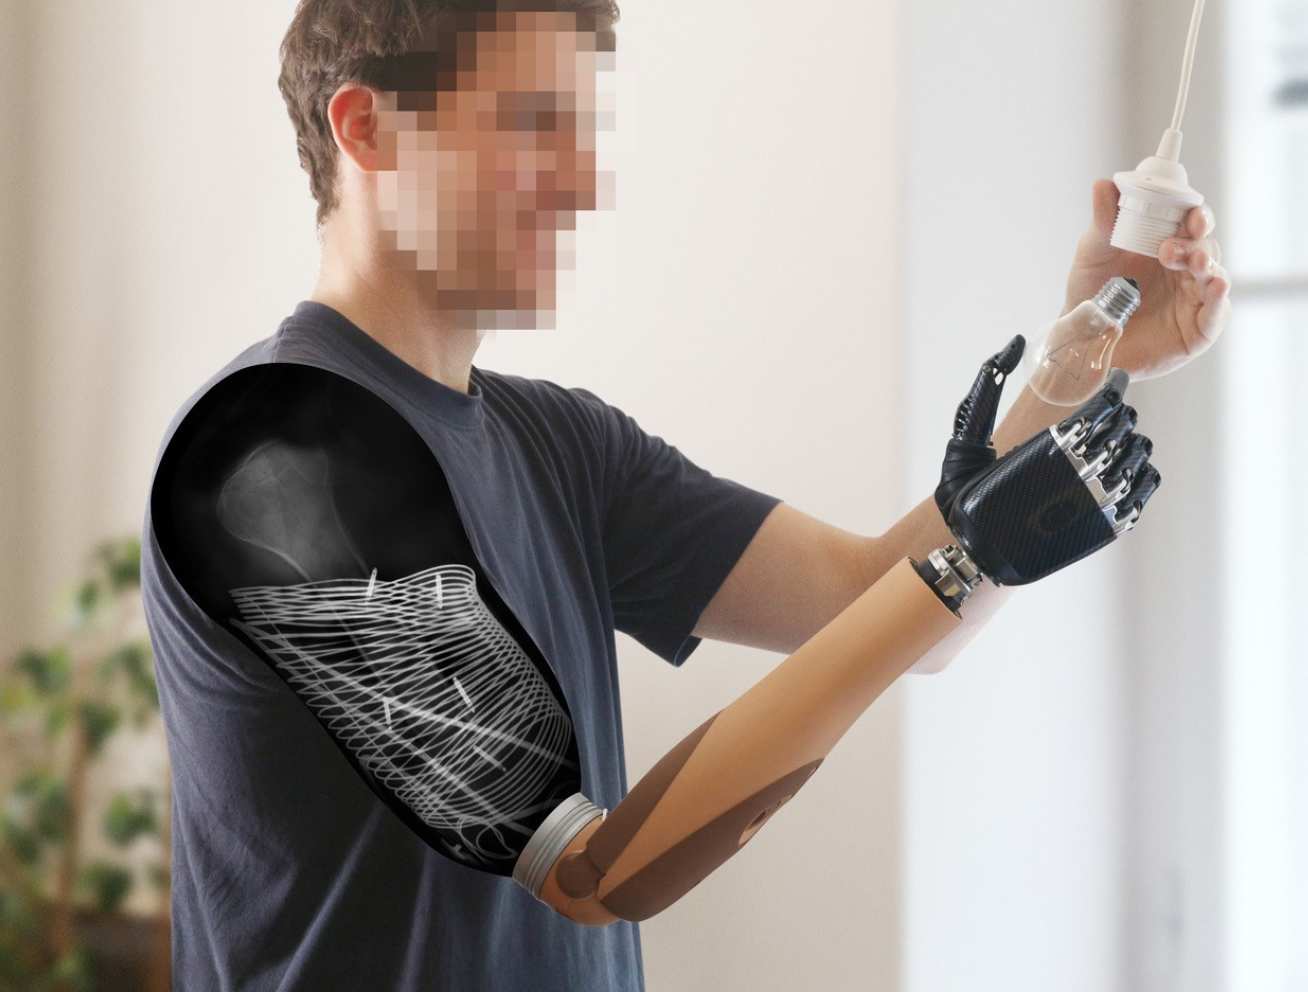 Electrodes in remaining arms give amputees better control of prosthetics, Imperial News